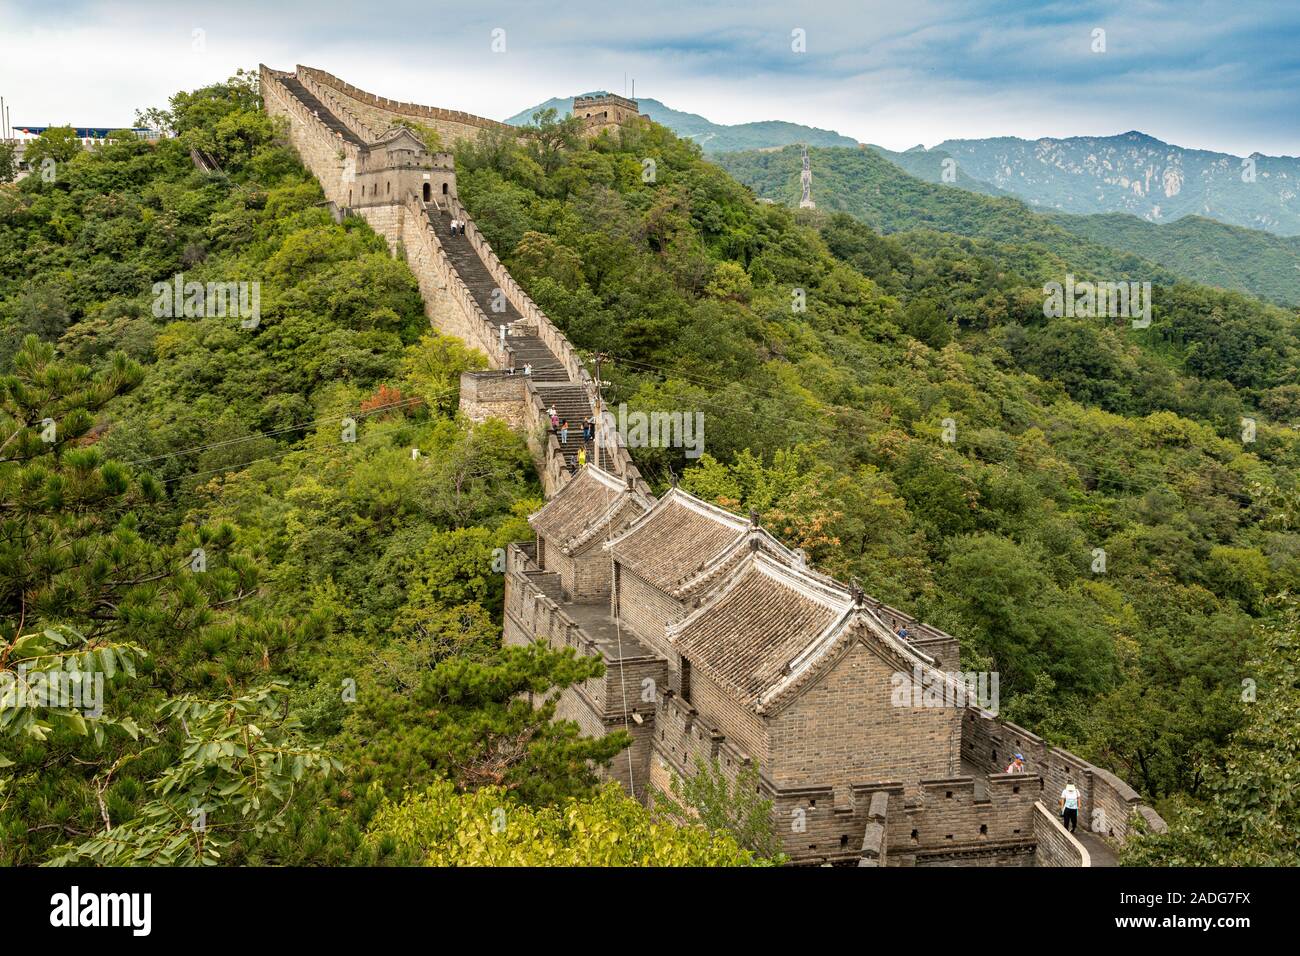 The Great Wall - UNESCO World Heritage Centre